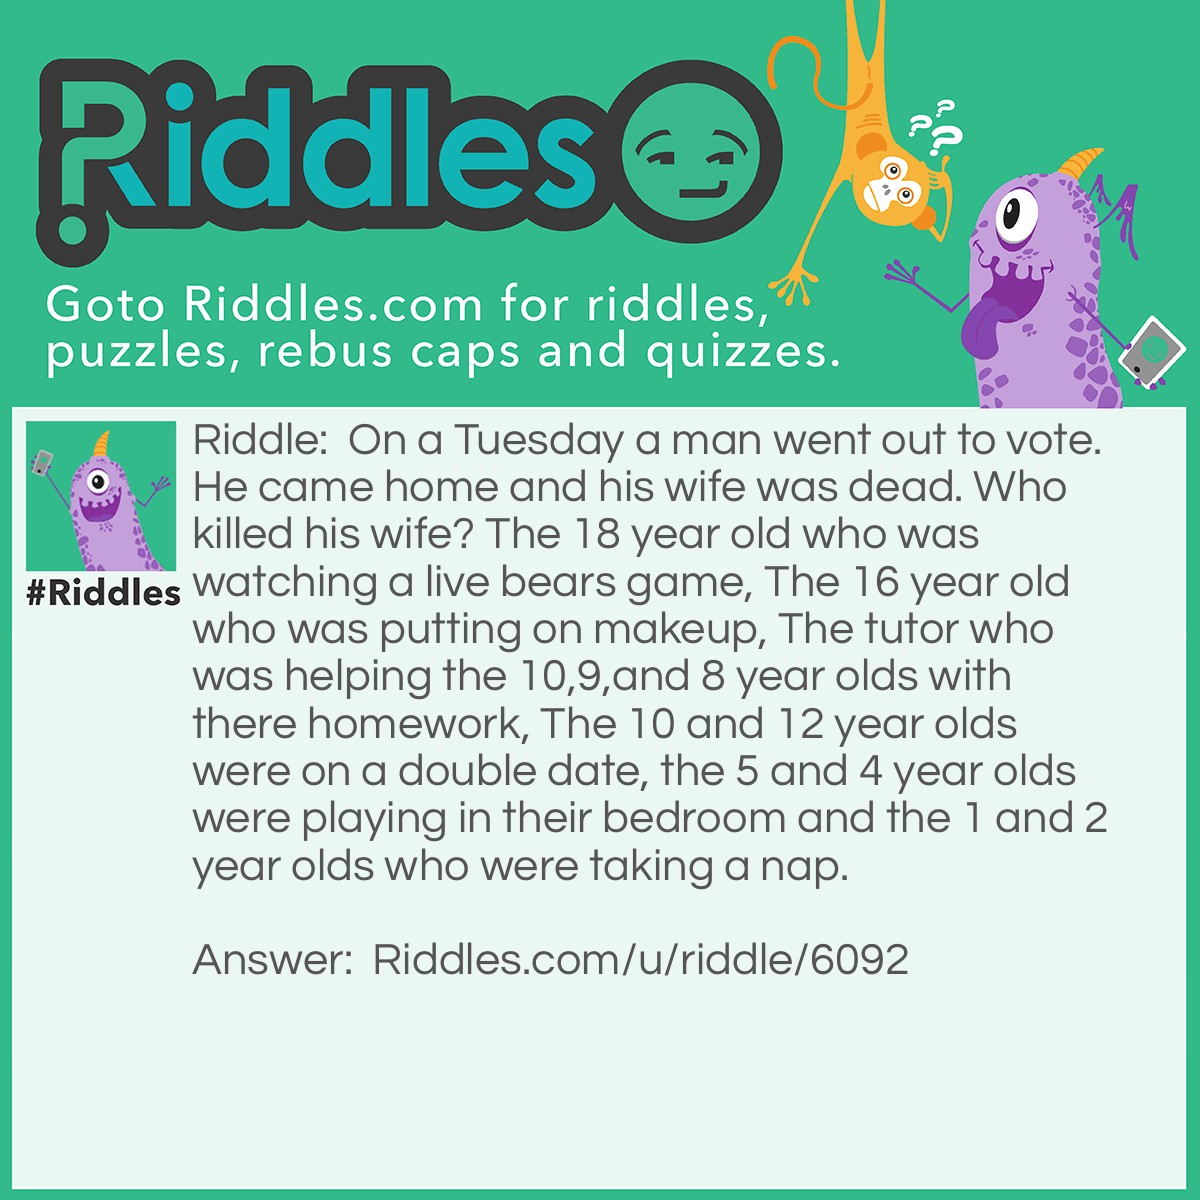 Riddle: On a Tuesday a man went out to vote. He came home and his wife was dead. Who killed his wife? The 18 year old who was watching a live bears game, The 16 year old who was putting on makeup, The tutor who was helping the 10,9,and 8 year olds with there homework, The 10 and 12 year olds were on a double date, the 5 and 4 year olds were playing in their bedroom and the 1 and 2 year olds who were taking a nap. Answer: The 18 year old, there’s no bears games on Tuesday.